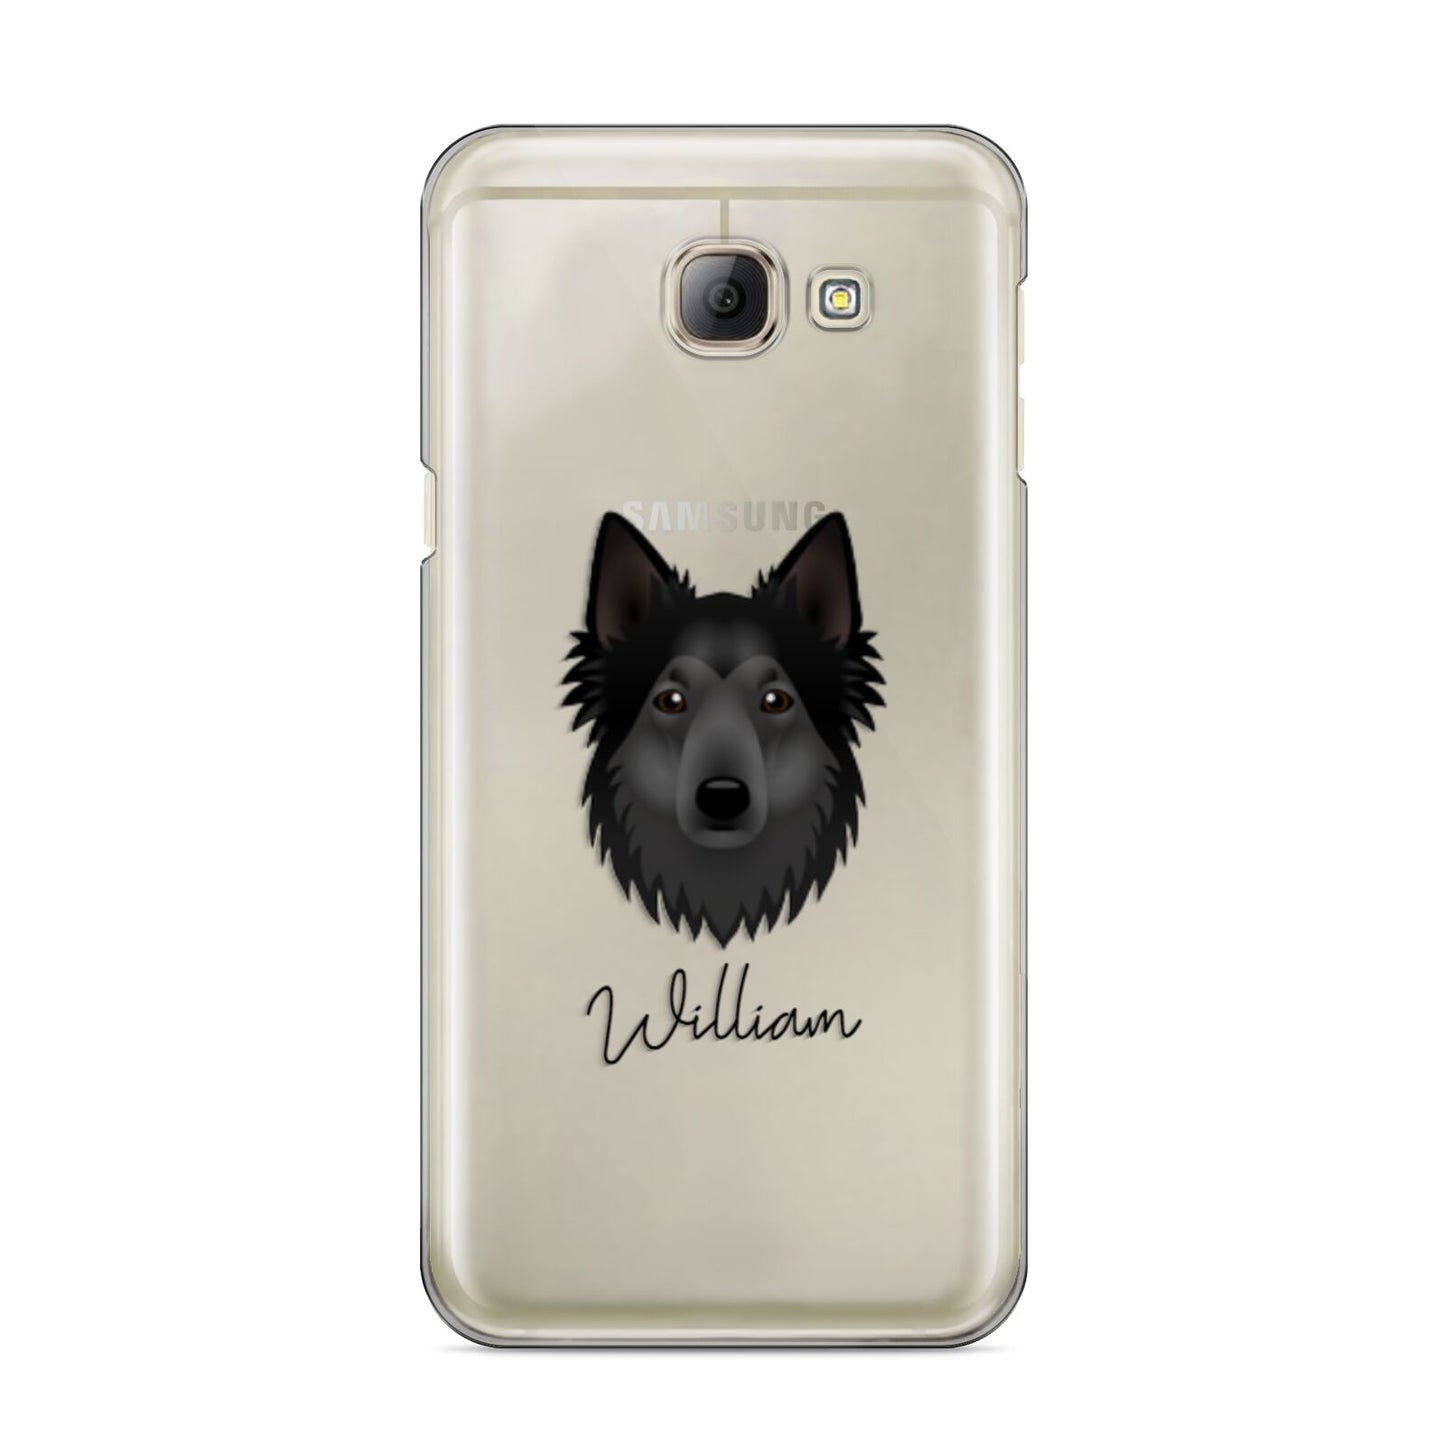 Shollie Personalised Samsung Galaxy A8 2016 Case